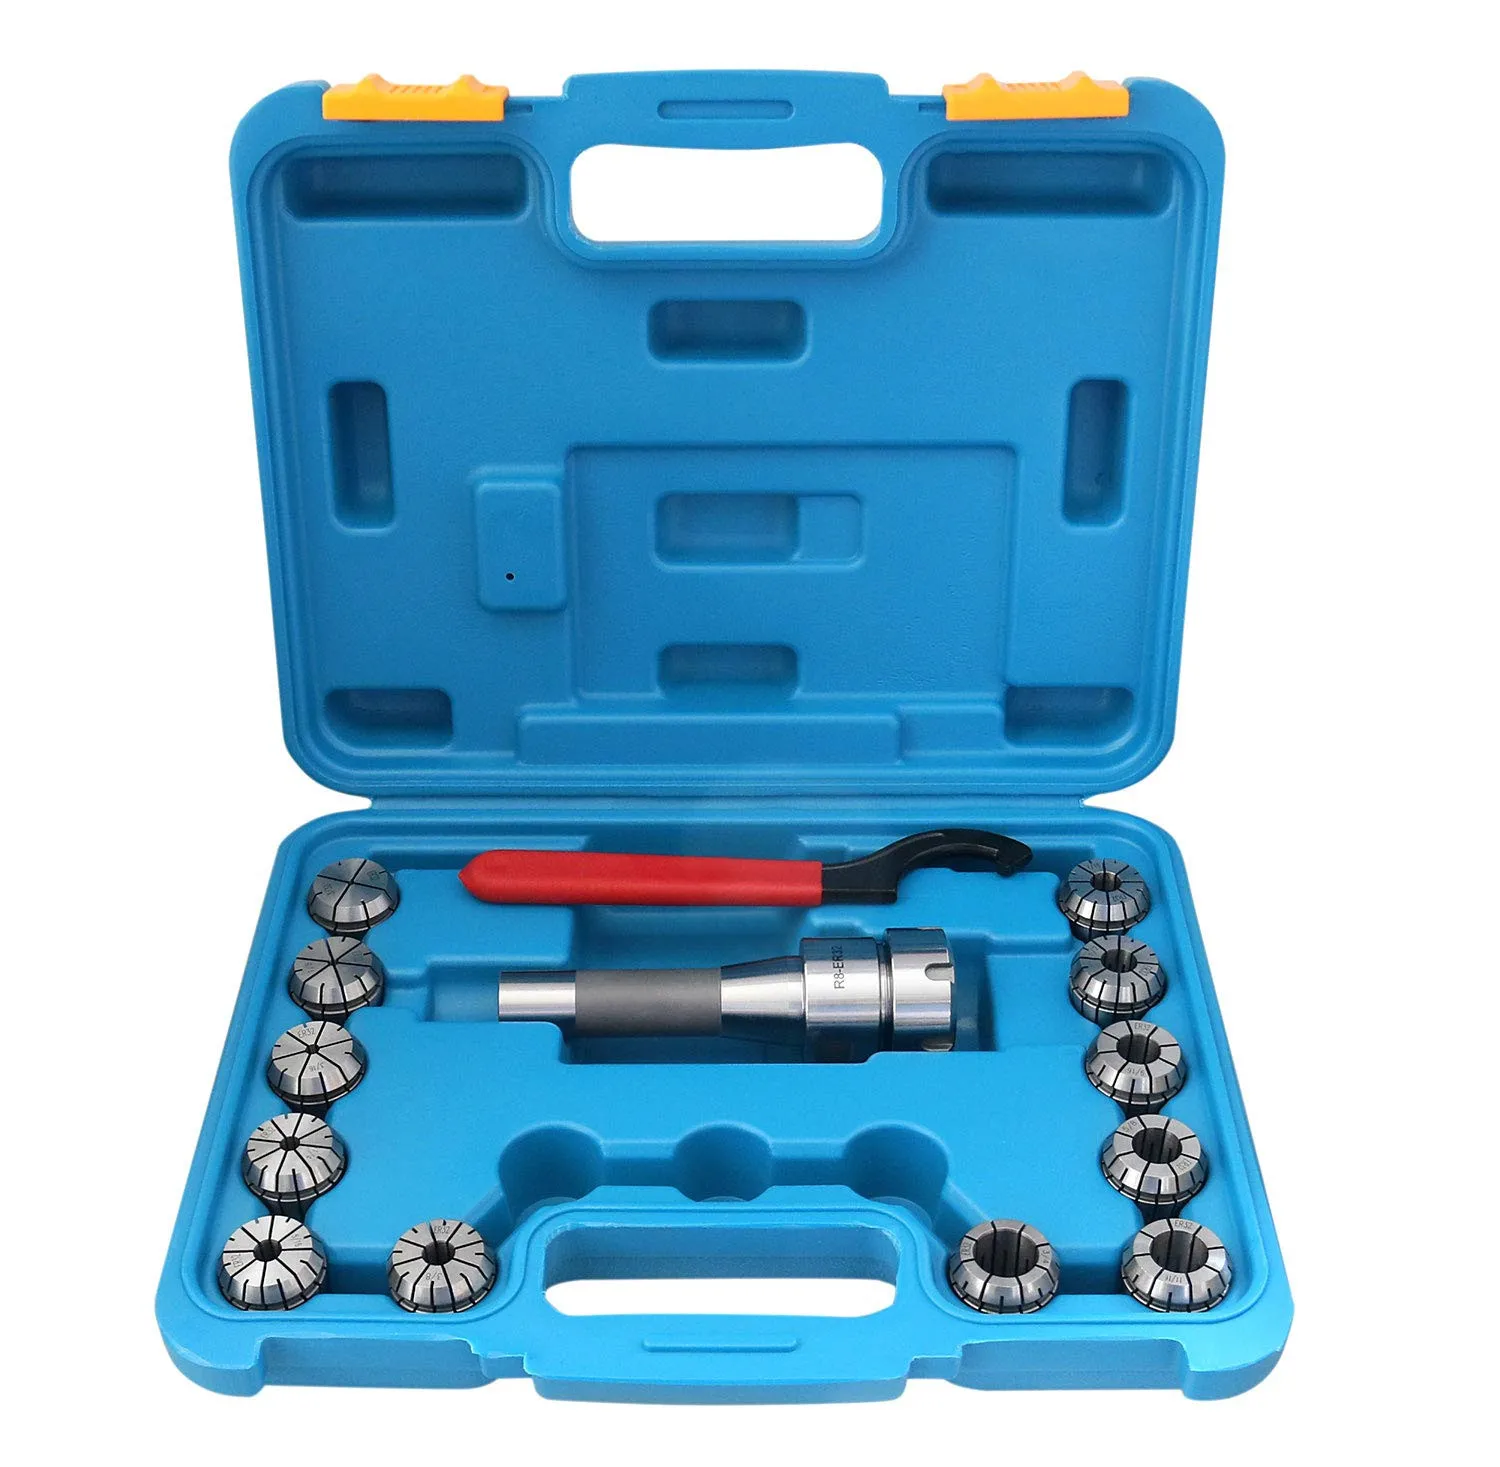 12Pcs Er-32 Collet Set Plus 1Pc R8 Bridgeport Shank Holder and Wrench Gifts Box Hand Tools,Home Improvement Workholding Devices